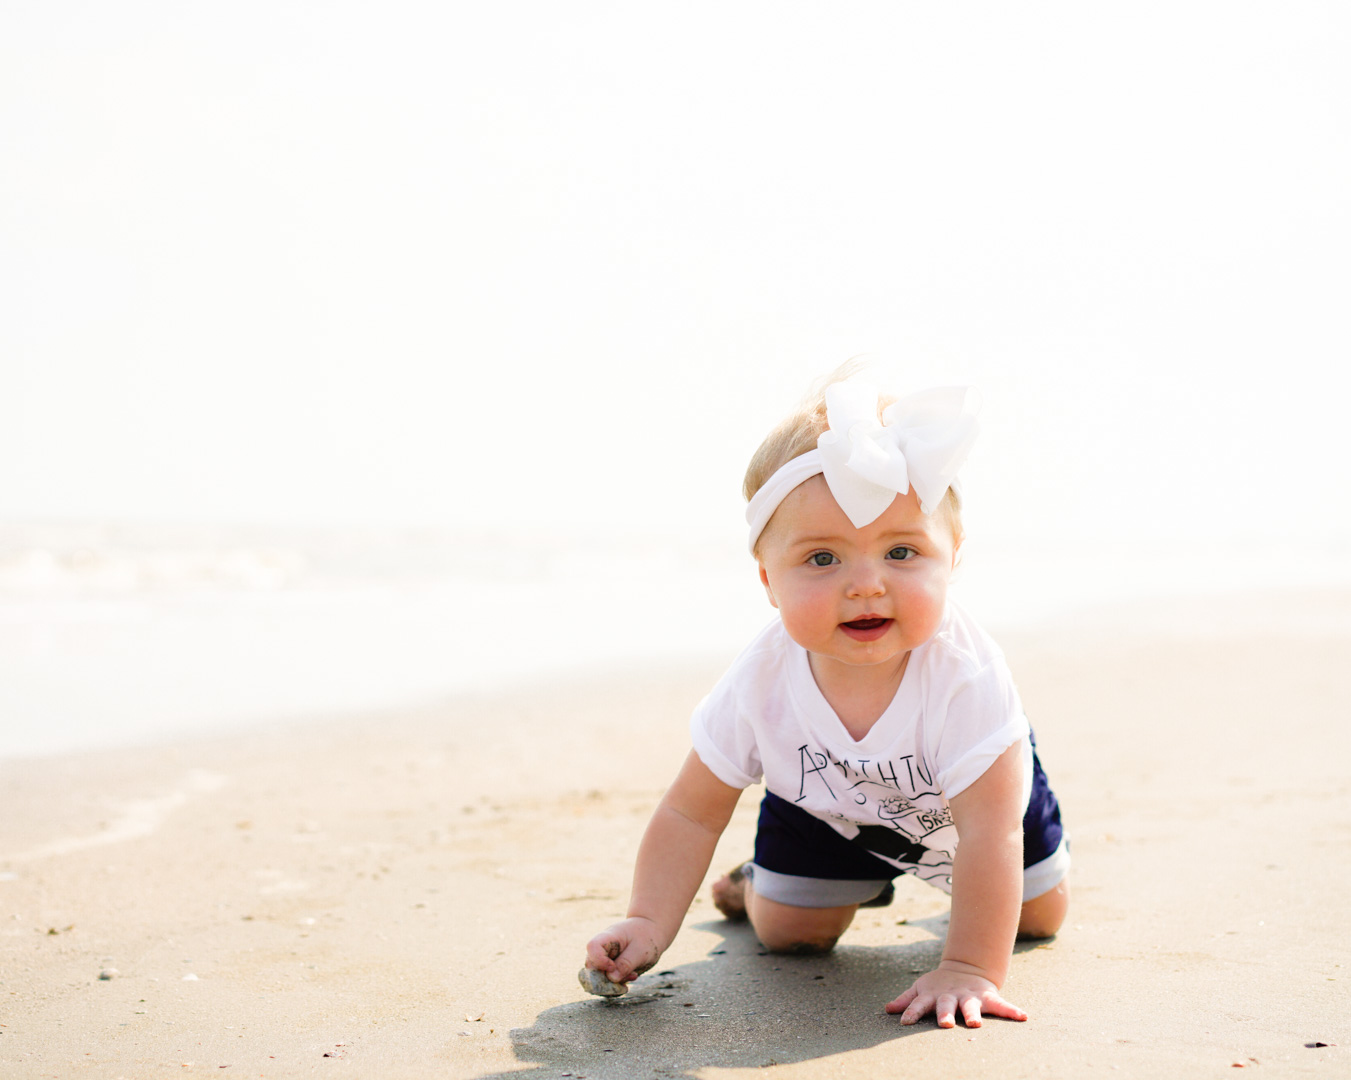 Katelyn Jones A Touch of Pink Blog Munchkin Campaign Orca Whale Sea World The Whale Sanctuary Cute Baby Girl Beach